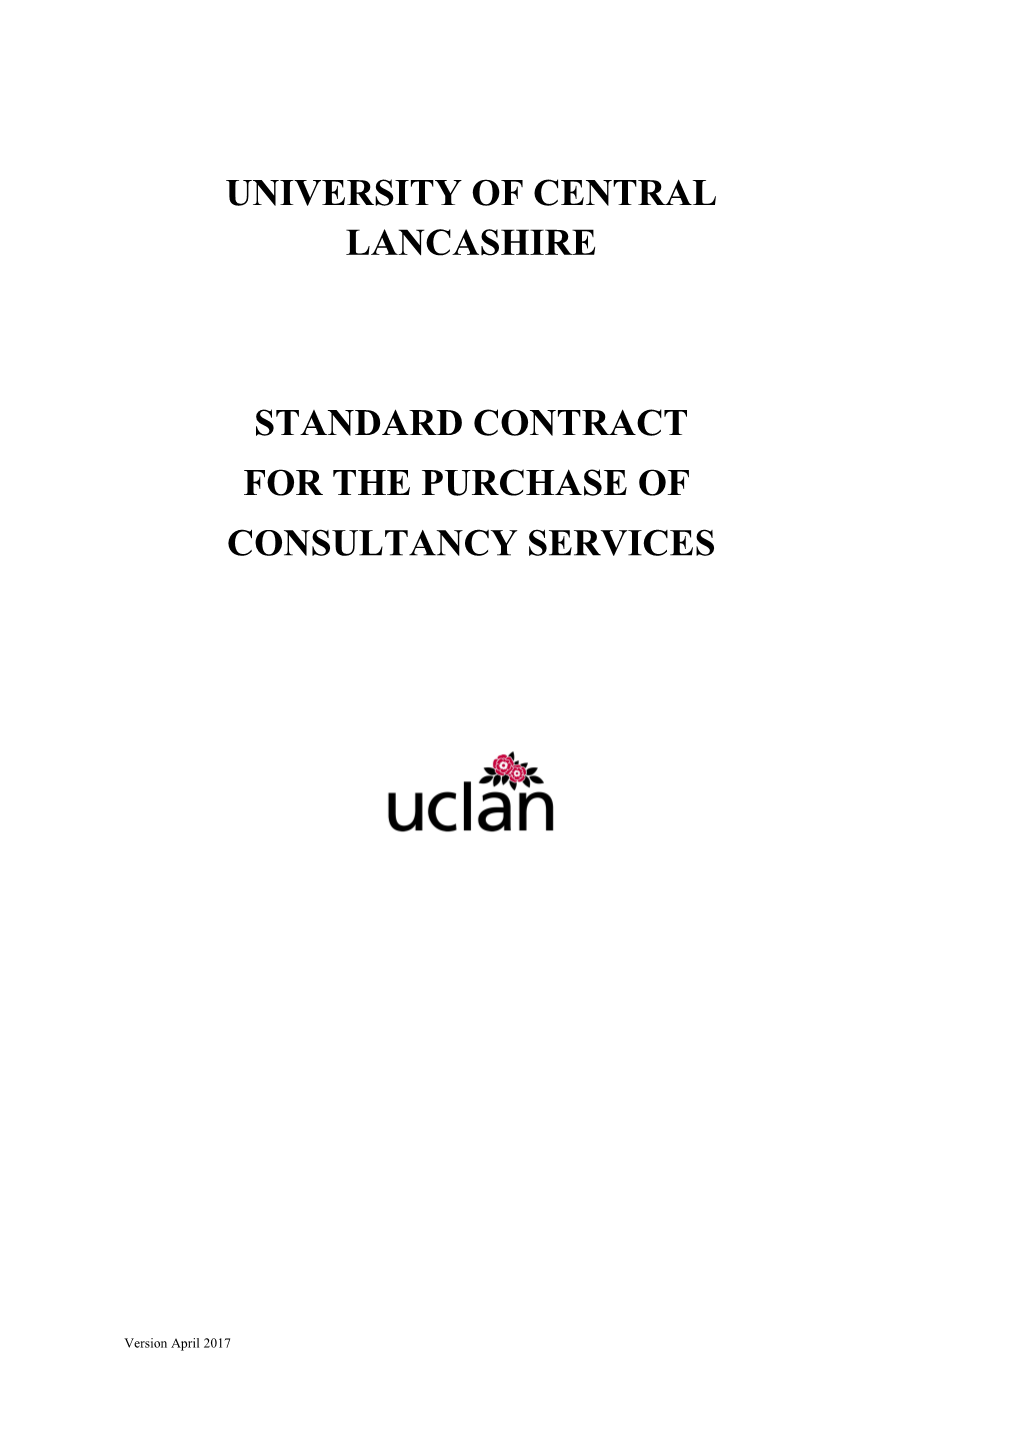 Conditions of Contract for the Purchase of Consultancy